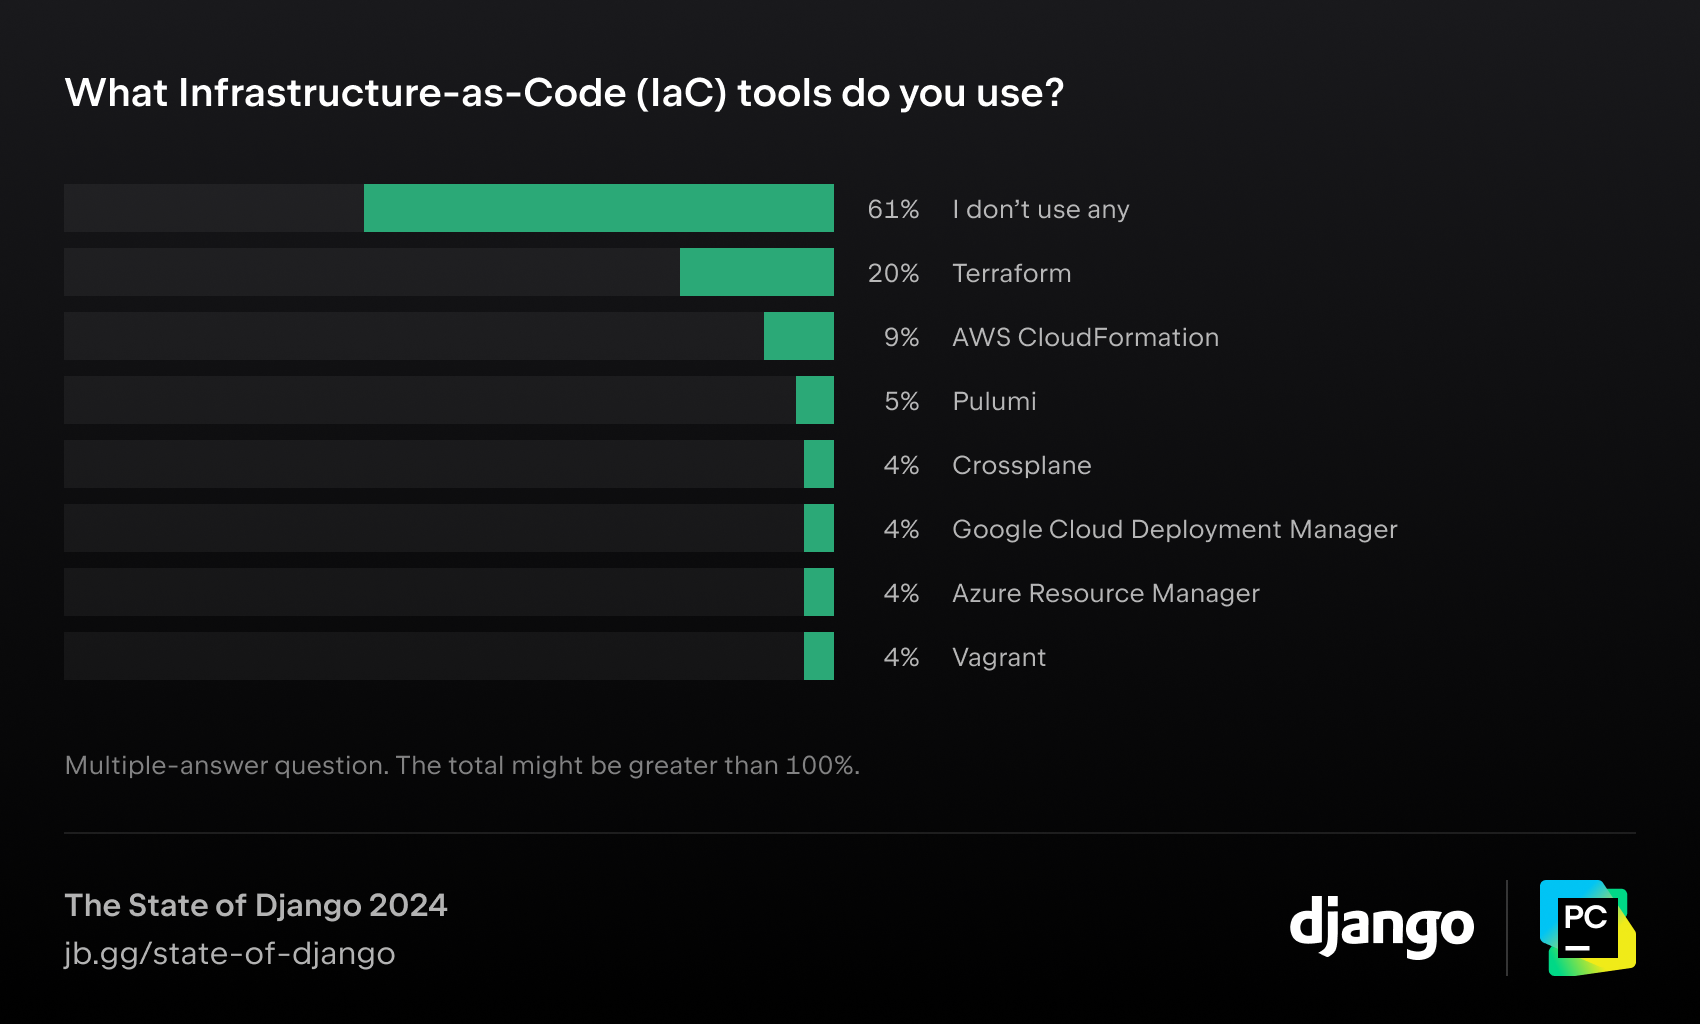 What Infrastructure-as-Code tools do you use?